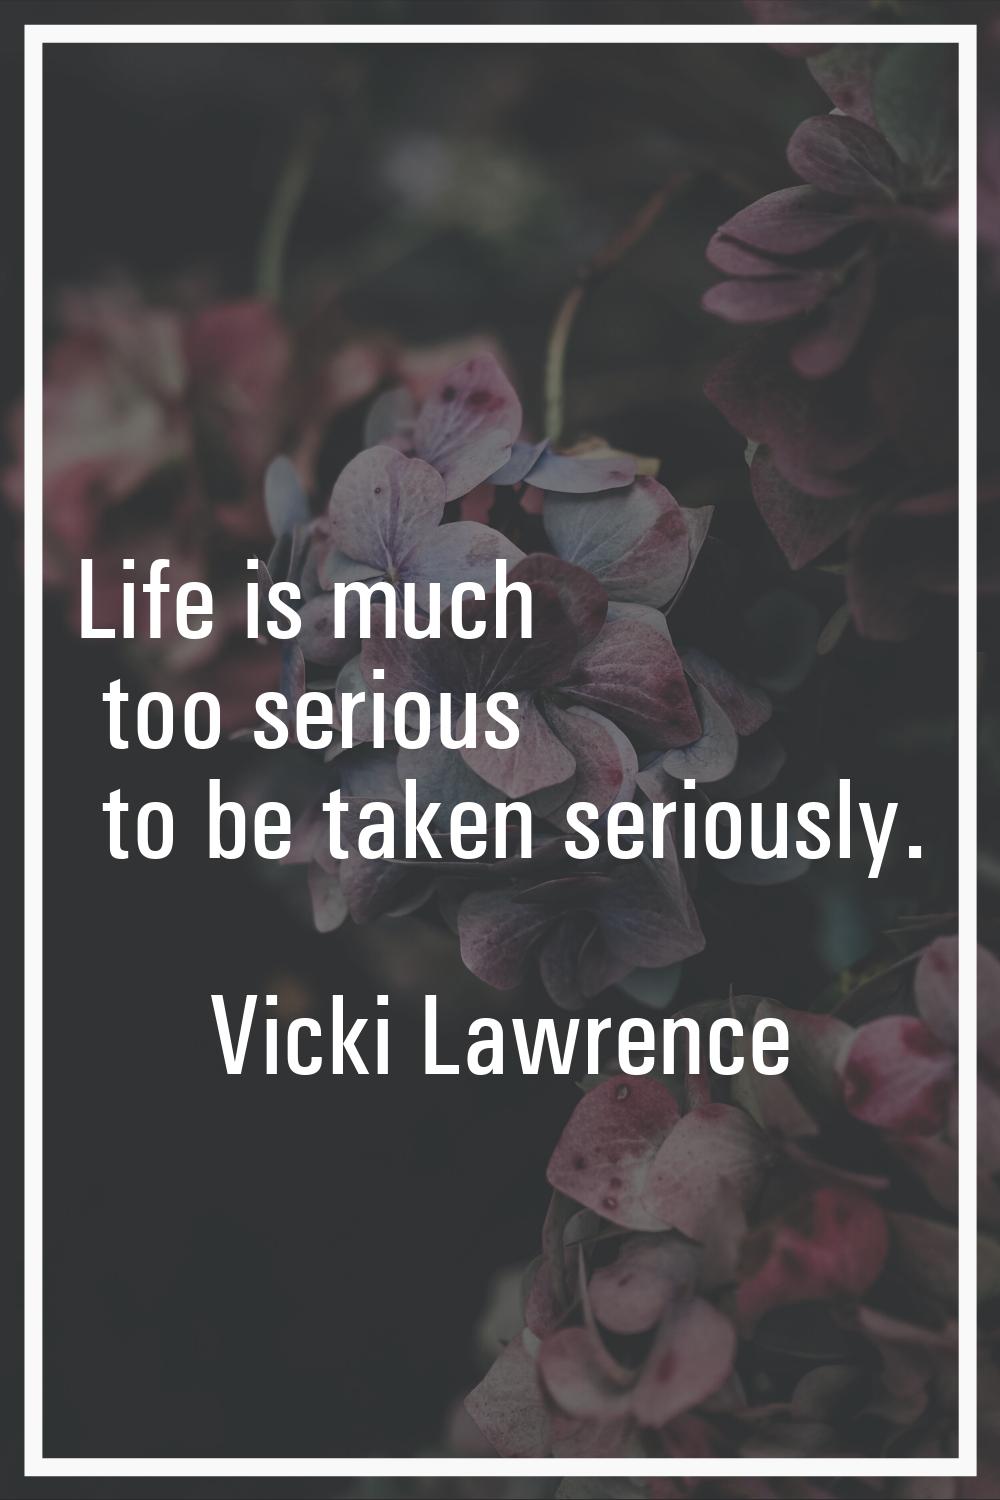 Life is much too serious to be taken seriously.